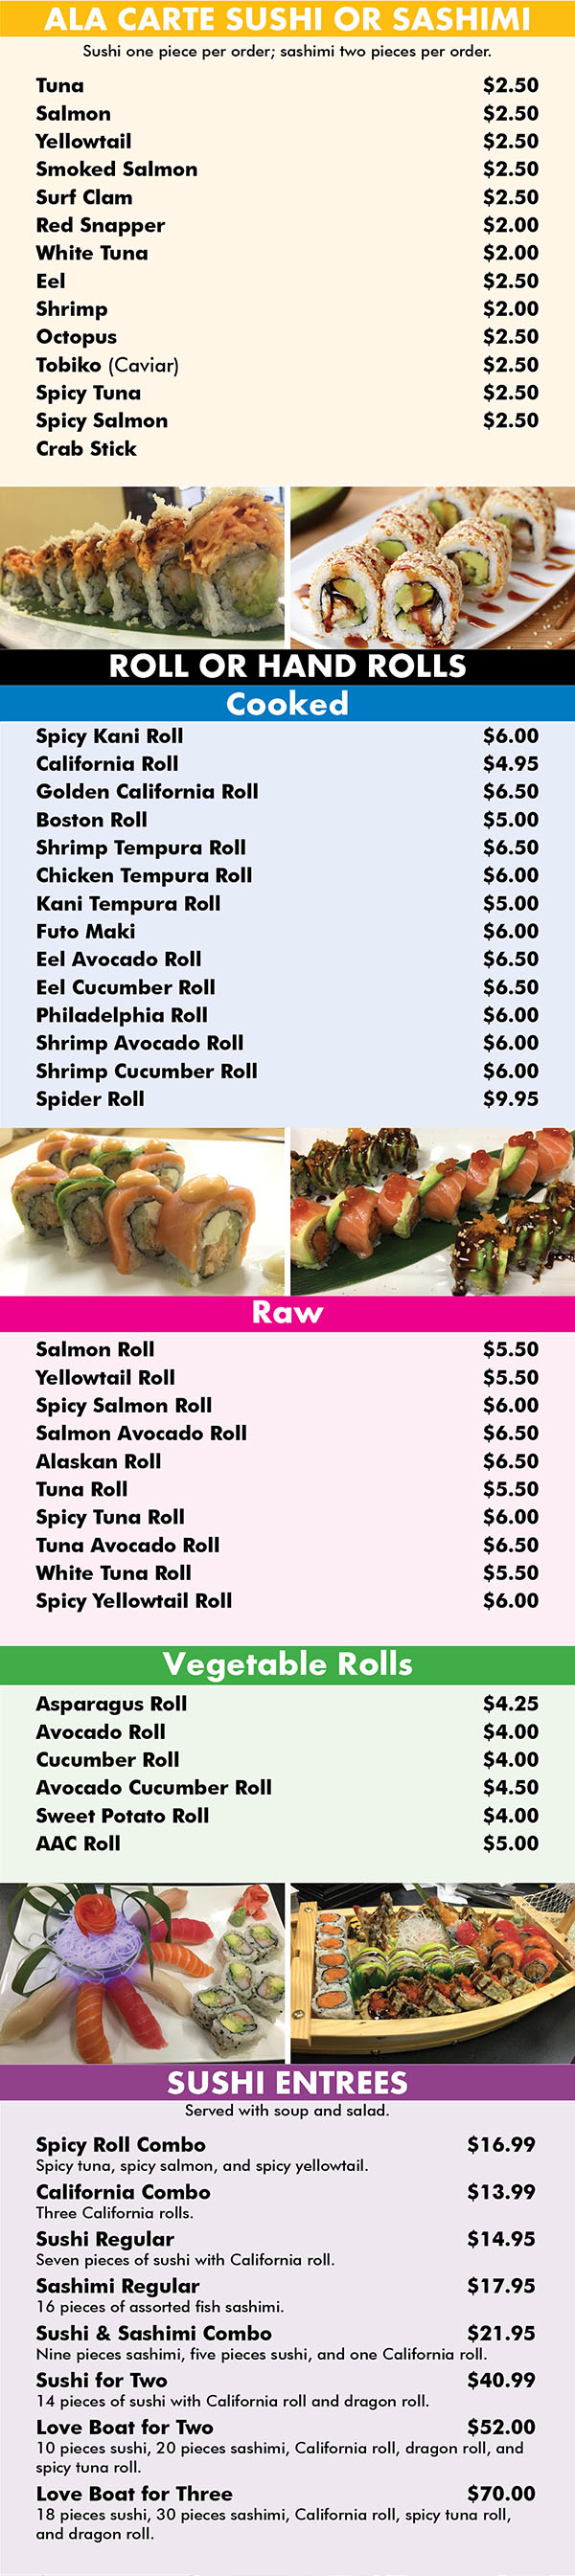 ALA CARTE SUSHI OR SASHIMI
Sushi one piece per order; sashimi two pieces per order.
Tuna				$2.50
Salmon				$2.50
Yellowtail				$2.50
Smoked Salmon				$2.50
Surf Clam				$2.50
Red Snapper				$2.00
White Tuna				$2.00
Eel				$2.50
Shrimp				$2.00
Octopus				$2.50
Tobiko (Caviar)				$2.50
Spicy Tuna				$2.50
Spicy Salmon				$2.50
Crab Stick

				$2.00





ROLL OR HAND ROLLS
Cooked
Spicy Kani Roll				$6.00
California Roll				$4.95
Golden California Roll				$6.50
Boston Roll				$5.00
Shrimp Tempura Roll				$6.50
Chicken Tempura Roll				$6.00
Kani Tempura Roll				$5.00
Futo Maki				$6.00
Eel Avocado Roll				$6.50
Eel Cucumber Roll				$6.50
Philadelphia Roll				$6.00
Shrimp Avocado Roll				$6.00
Shrimp Cucumber Roll				$6.00
Spider Roll				$9.95




Raw
Salmon Roll				$5.50
Yellowtail Roll				$5.50
Spicy Salmon Roll				$6.00
Salmon Avocado Roll				$6.50
Alaskan Roll				$6.50
Tuna Roll				$5.50
Spicy Tuna Roll				$6.00
Tuna Avocado Roll				$6.50
White Tuna Roll				$5.50
Spicy Yellowtail Roll				$6.00

Vegetable Rolls
Asparagus Roll				$4.25
Avocado Roll				$4.00
Cucumber Roll				$4.00
Avocado Cucumber Roll				$4.50
Sweet Potato Roll				$4.00
AAC Roll				$5.00







SUSHI ENTREES
Served with soup and salad.
Spicy Roll Combo		$16.99
Spicy tuna, spicy salmon, and spicy yellowtail.
California Combo		$13.99
Three California rolls.
Sushi Regular		$14.95
Seven pieces of sushi with California roll.
Sashimi Regular		$17.95
16 pieces of assorted fish sashimi.
Sushi & Sashimi Combo		$21.95
Nine pieces sashimi, five pieces sushi, and one California roll.
Sushi for Two		$40.99
14 pieces of sushi with California roll and dragon roll.
Love Boat for Two		$52.00
10 pieces sushi, 20 pieces sashimi, California roll, dragon roll, and spicy tuna roll.
Love Boat for Three		$70.00
18 pieces sushi, 30 pieces sashimi, California roll, spicy tuna roll, and dragon roll.
